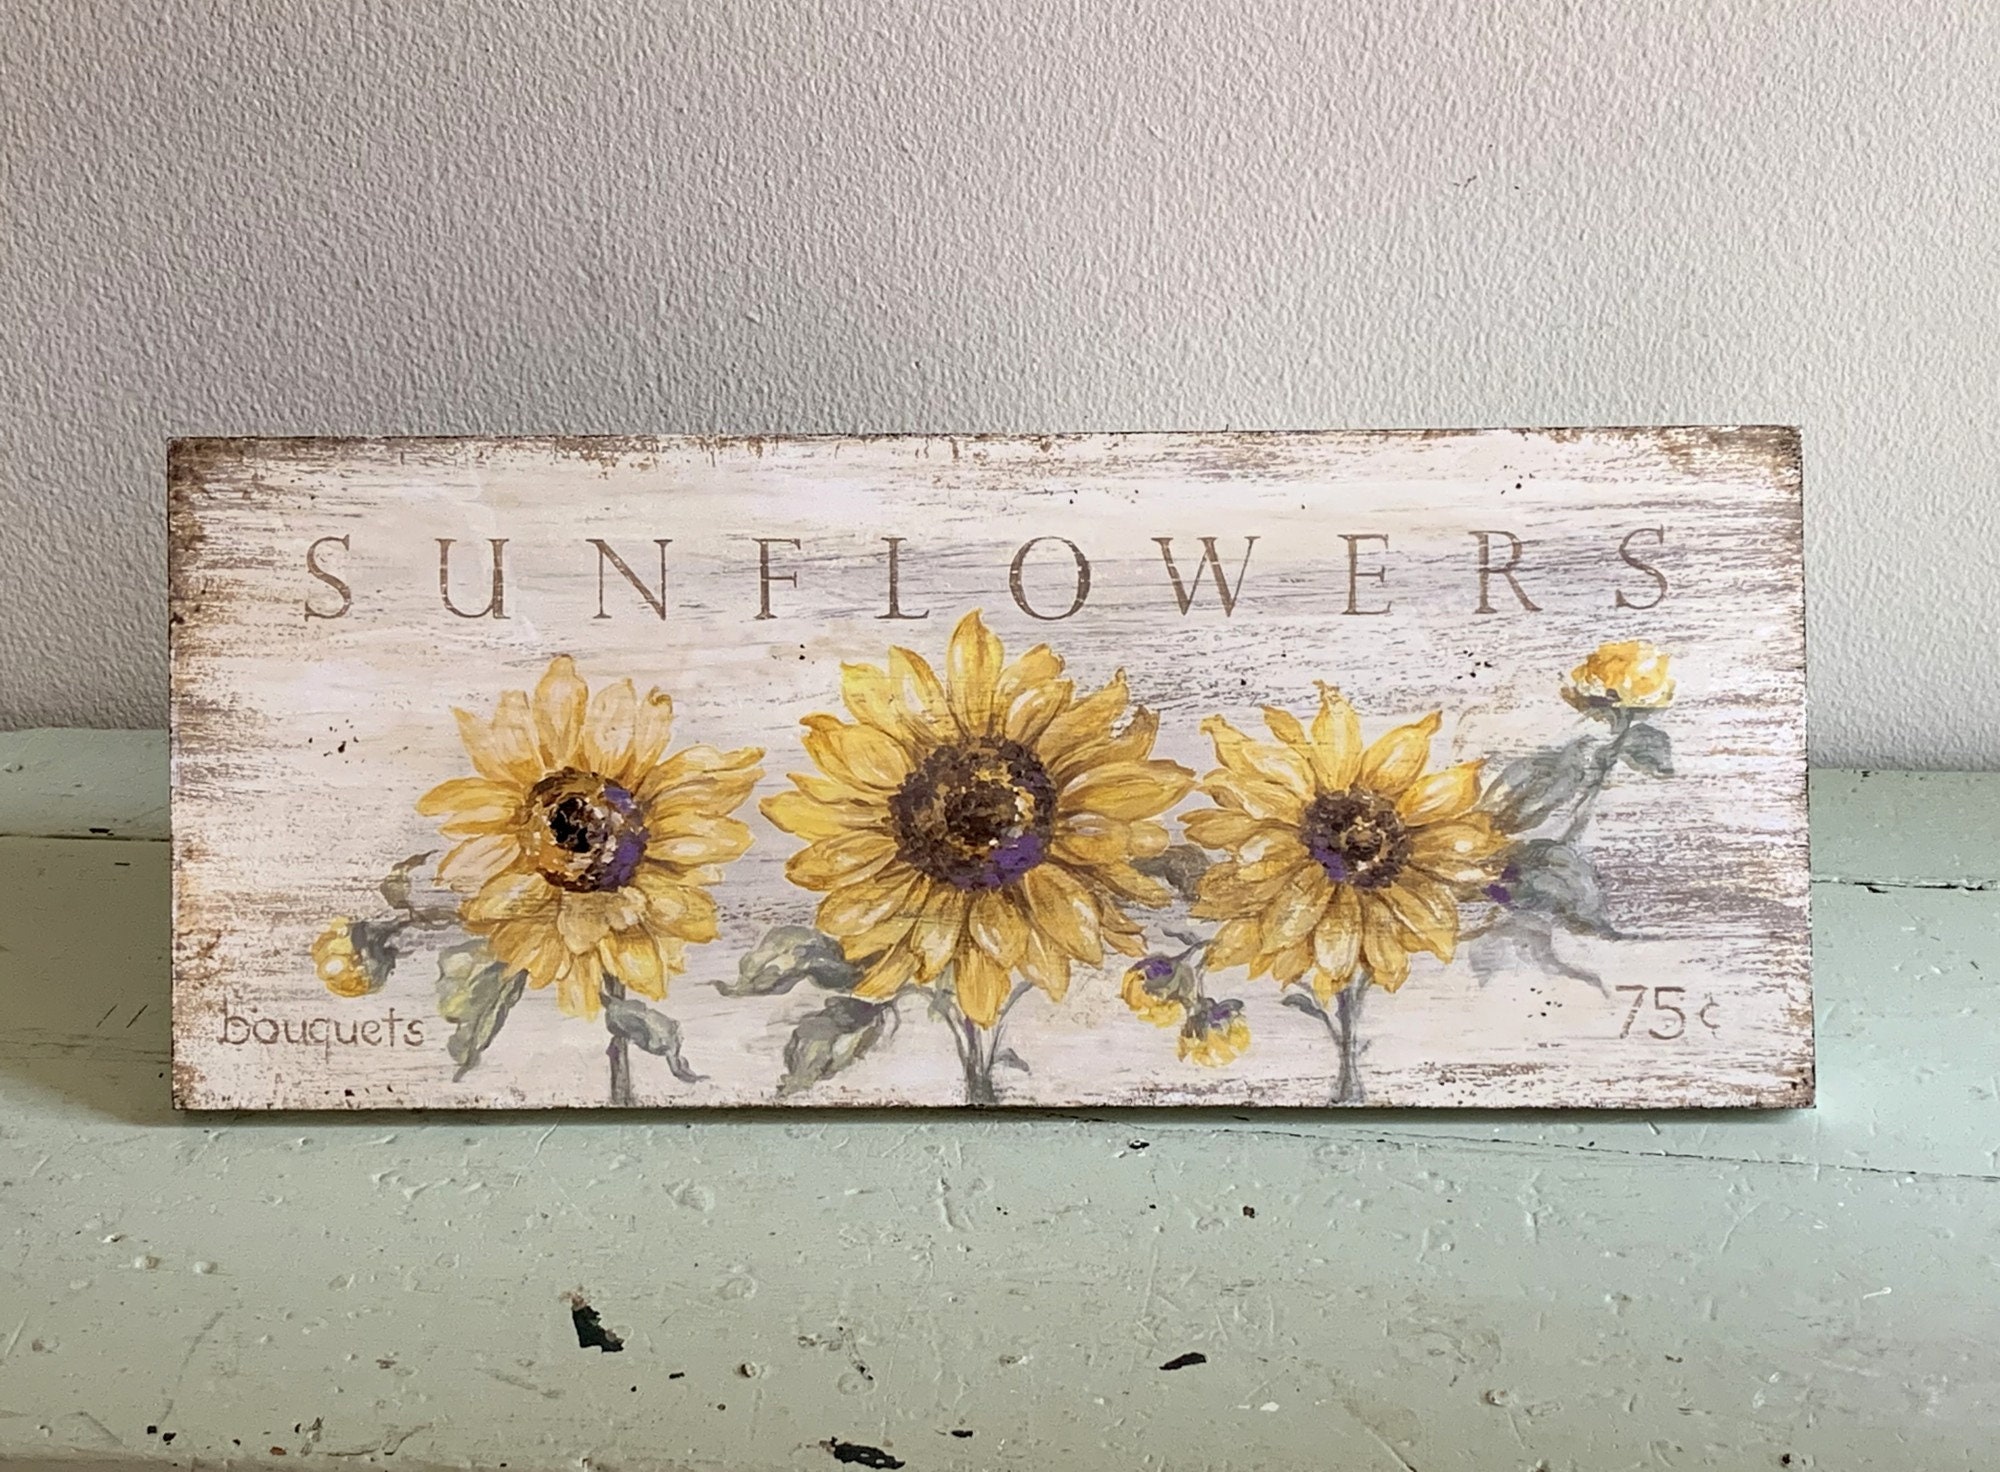 Sunflower Stencils for Painting on Wood Canvas Paper Fabric Floor